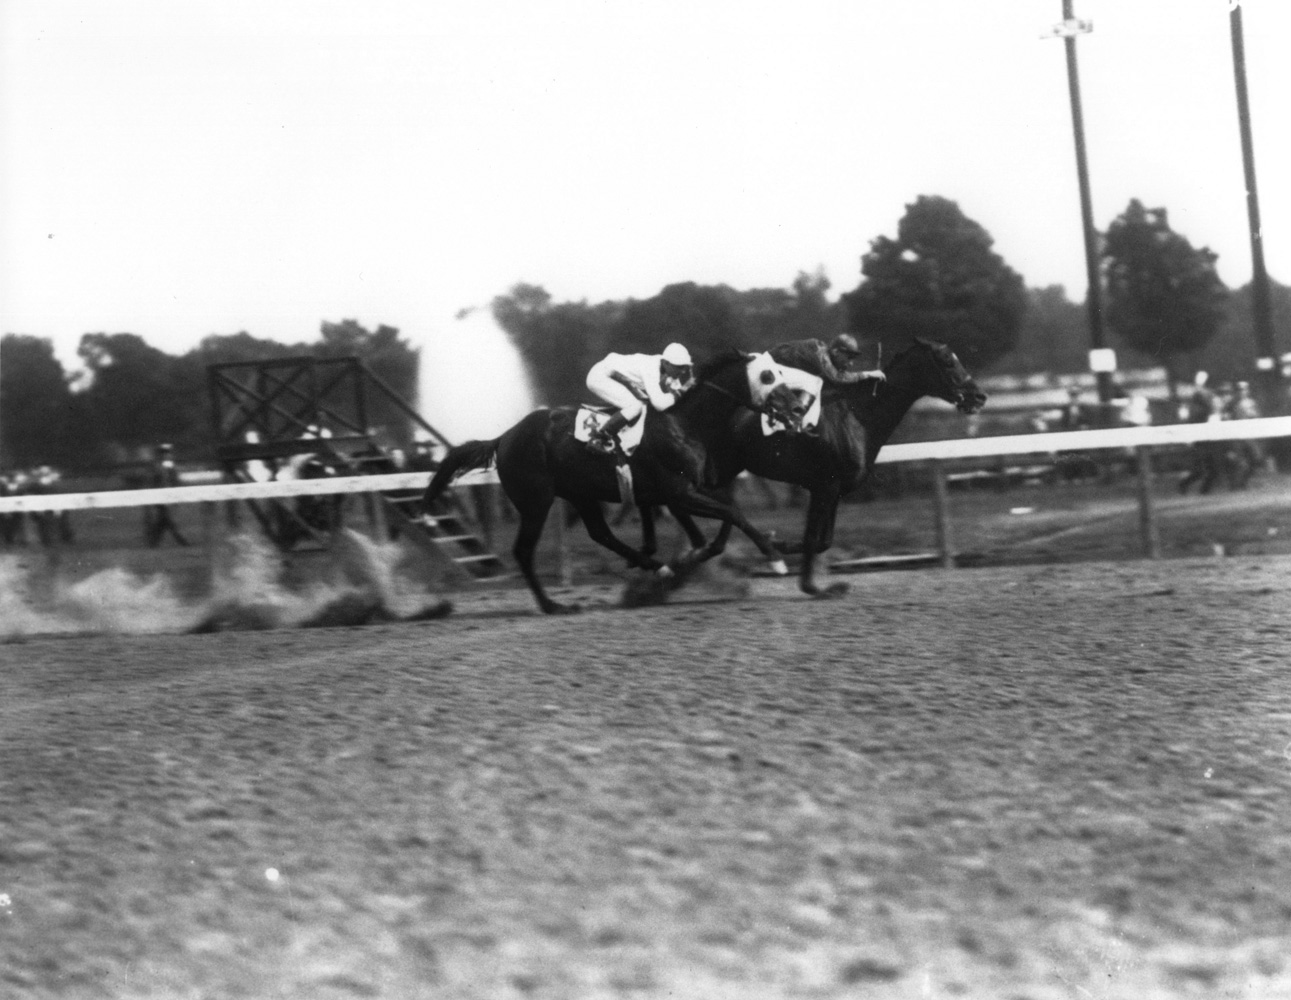 Exterminator (Albert Johnson up) winning the 1922 Saratoga Cup (Keeneland Library Cook Collection/Museum Collection)